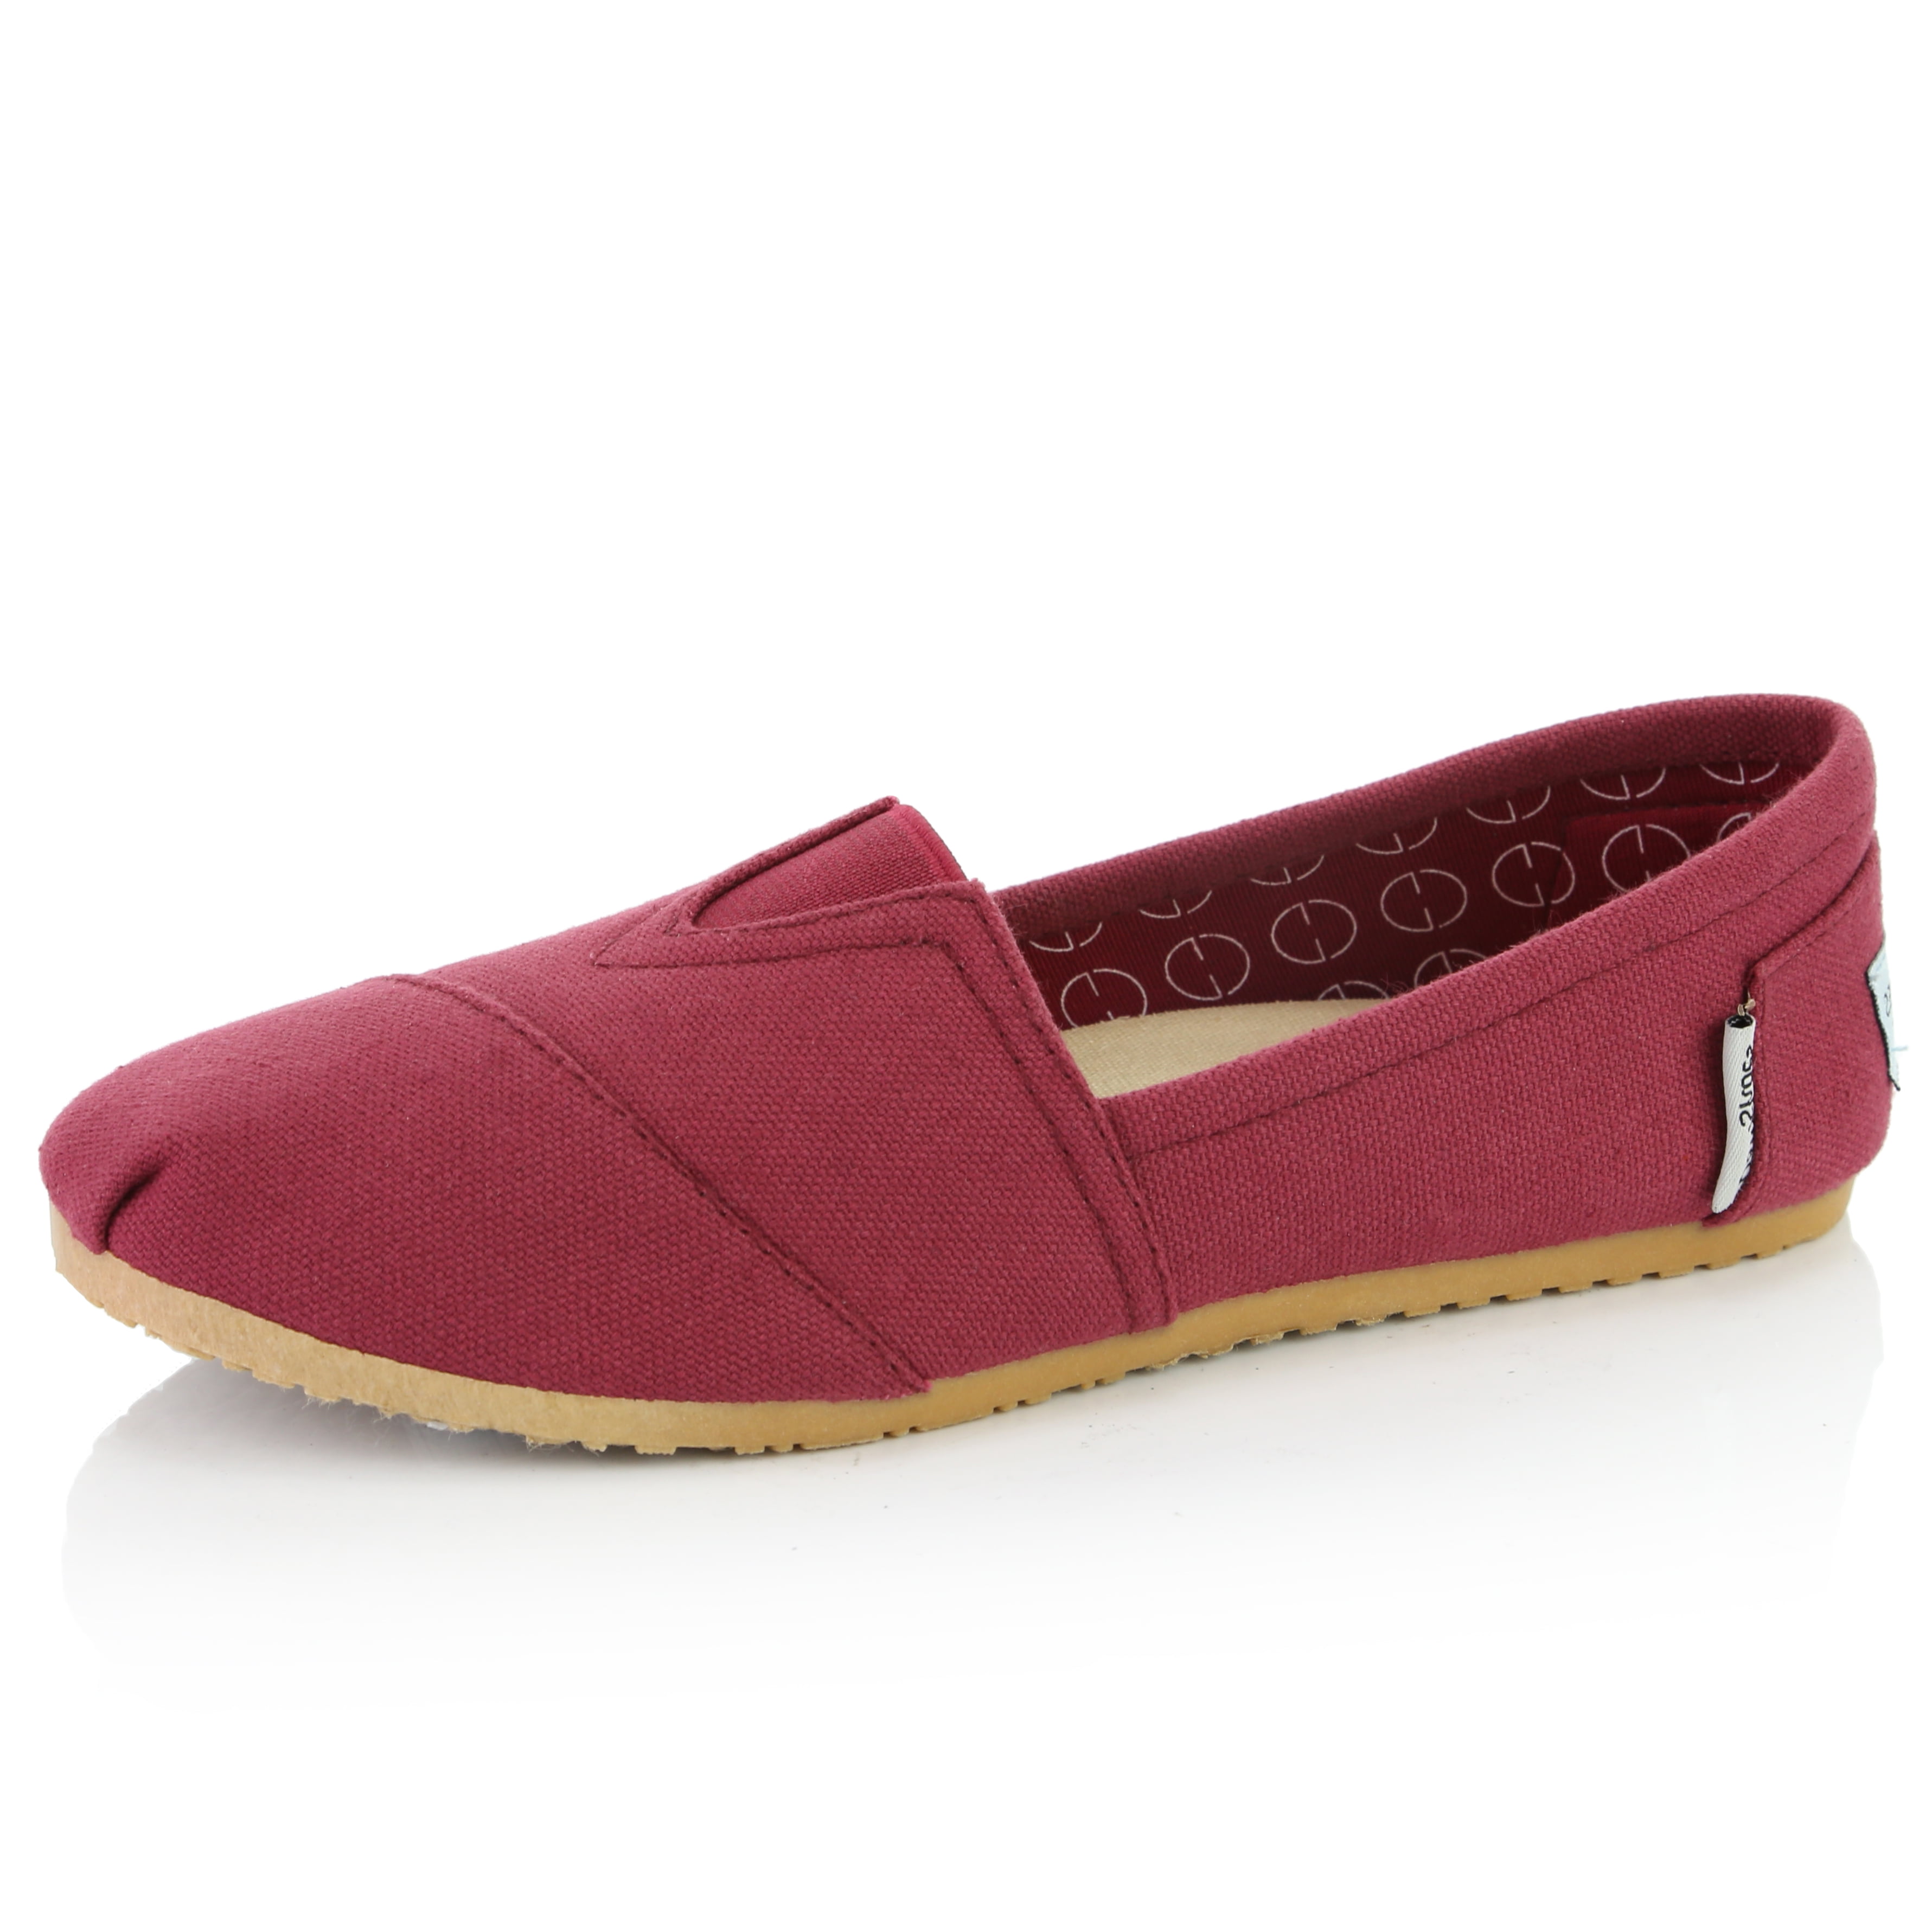 Details about   Women's Fashion Round Toe Faux Suede Loafers Casual Solid Color Pull-On Flats 